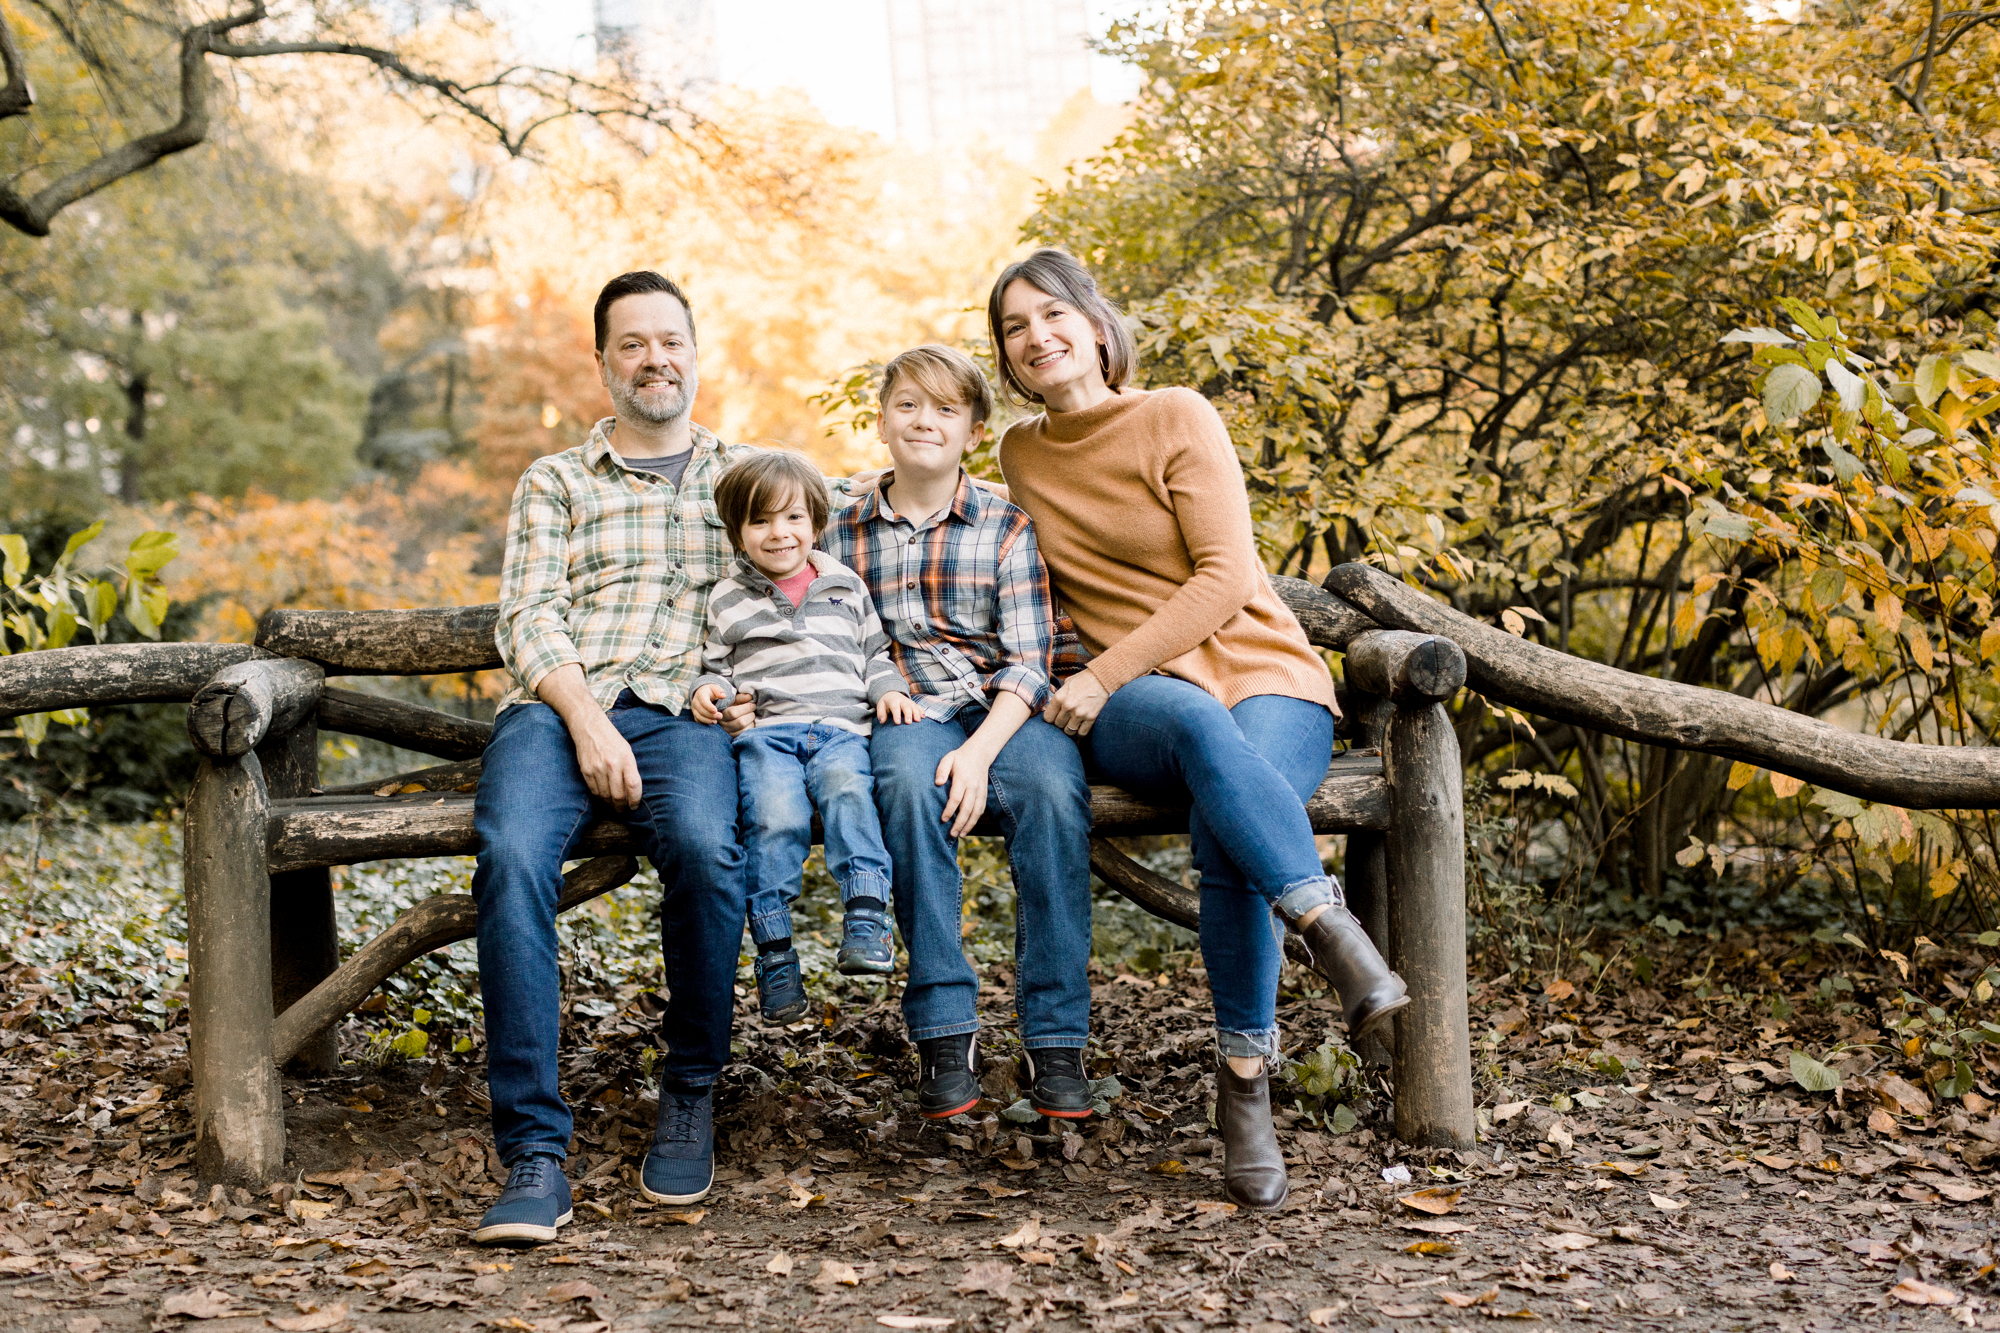 Awesome Central Park Family Photos in New York